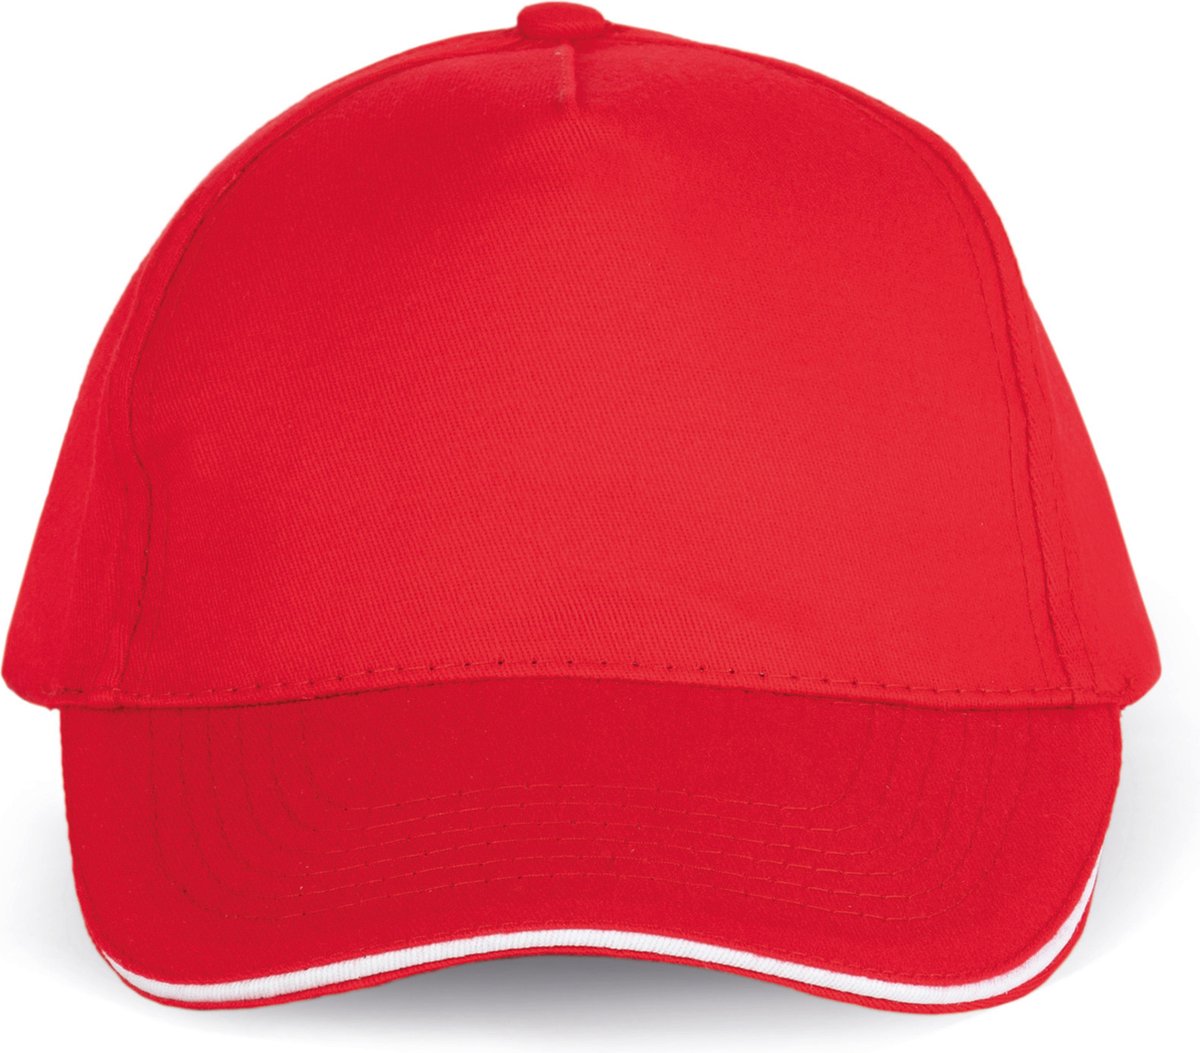 K-up 5 Panel Cap/Pet met contrasterende bies Red / White - One Size